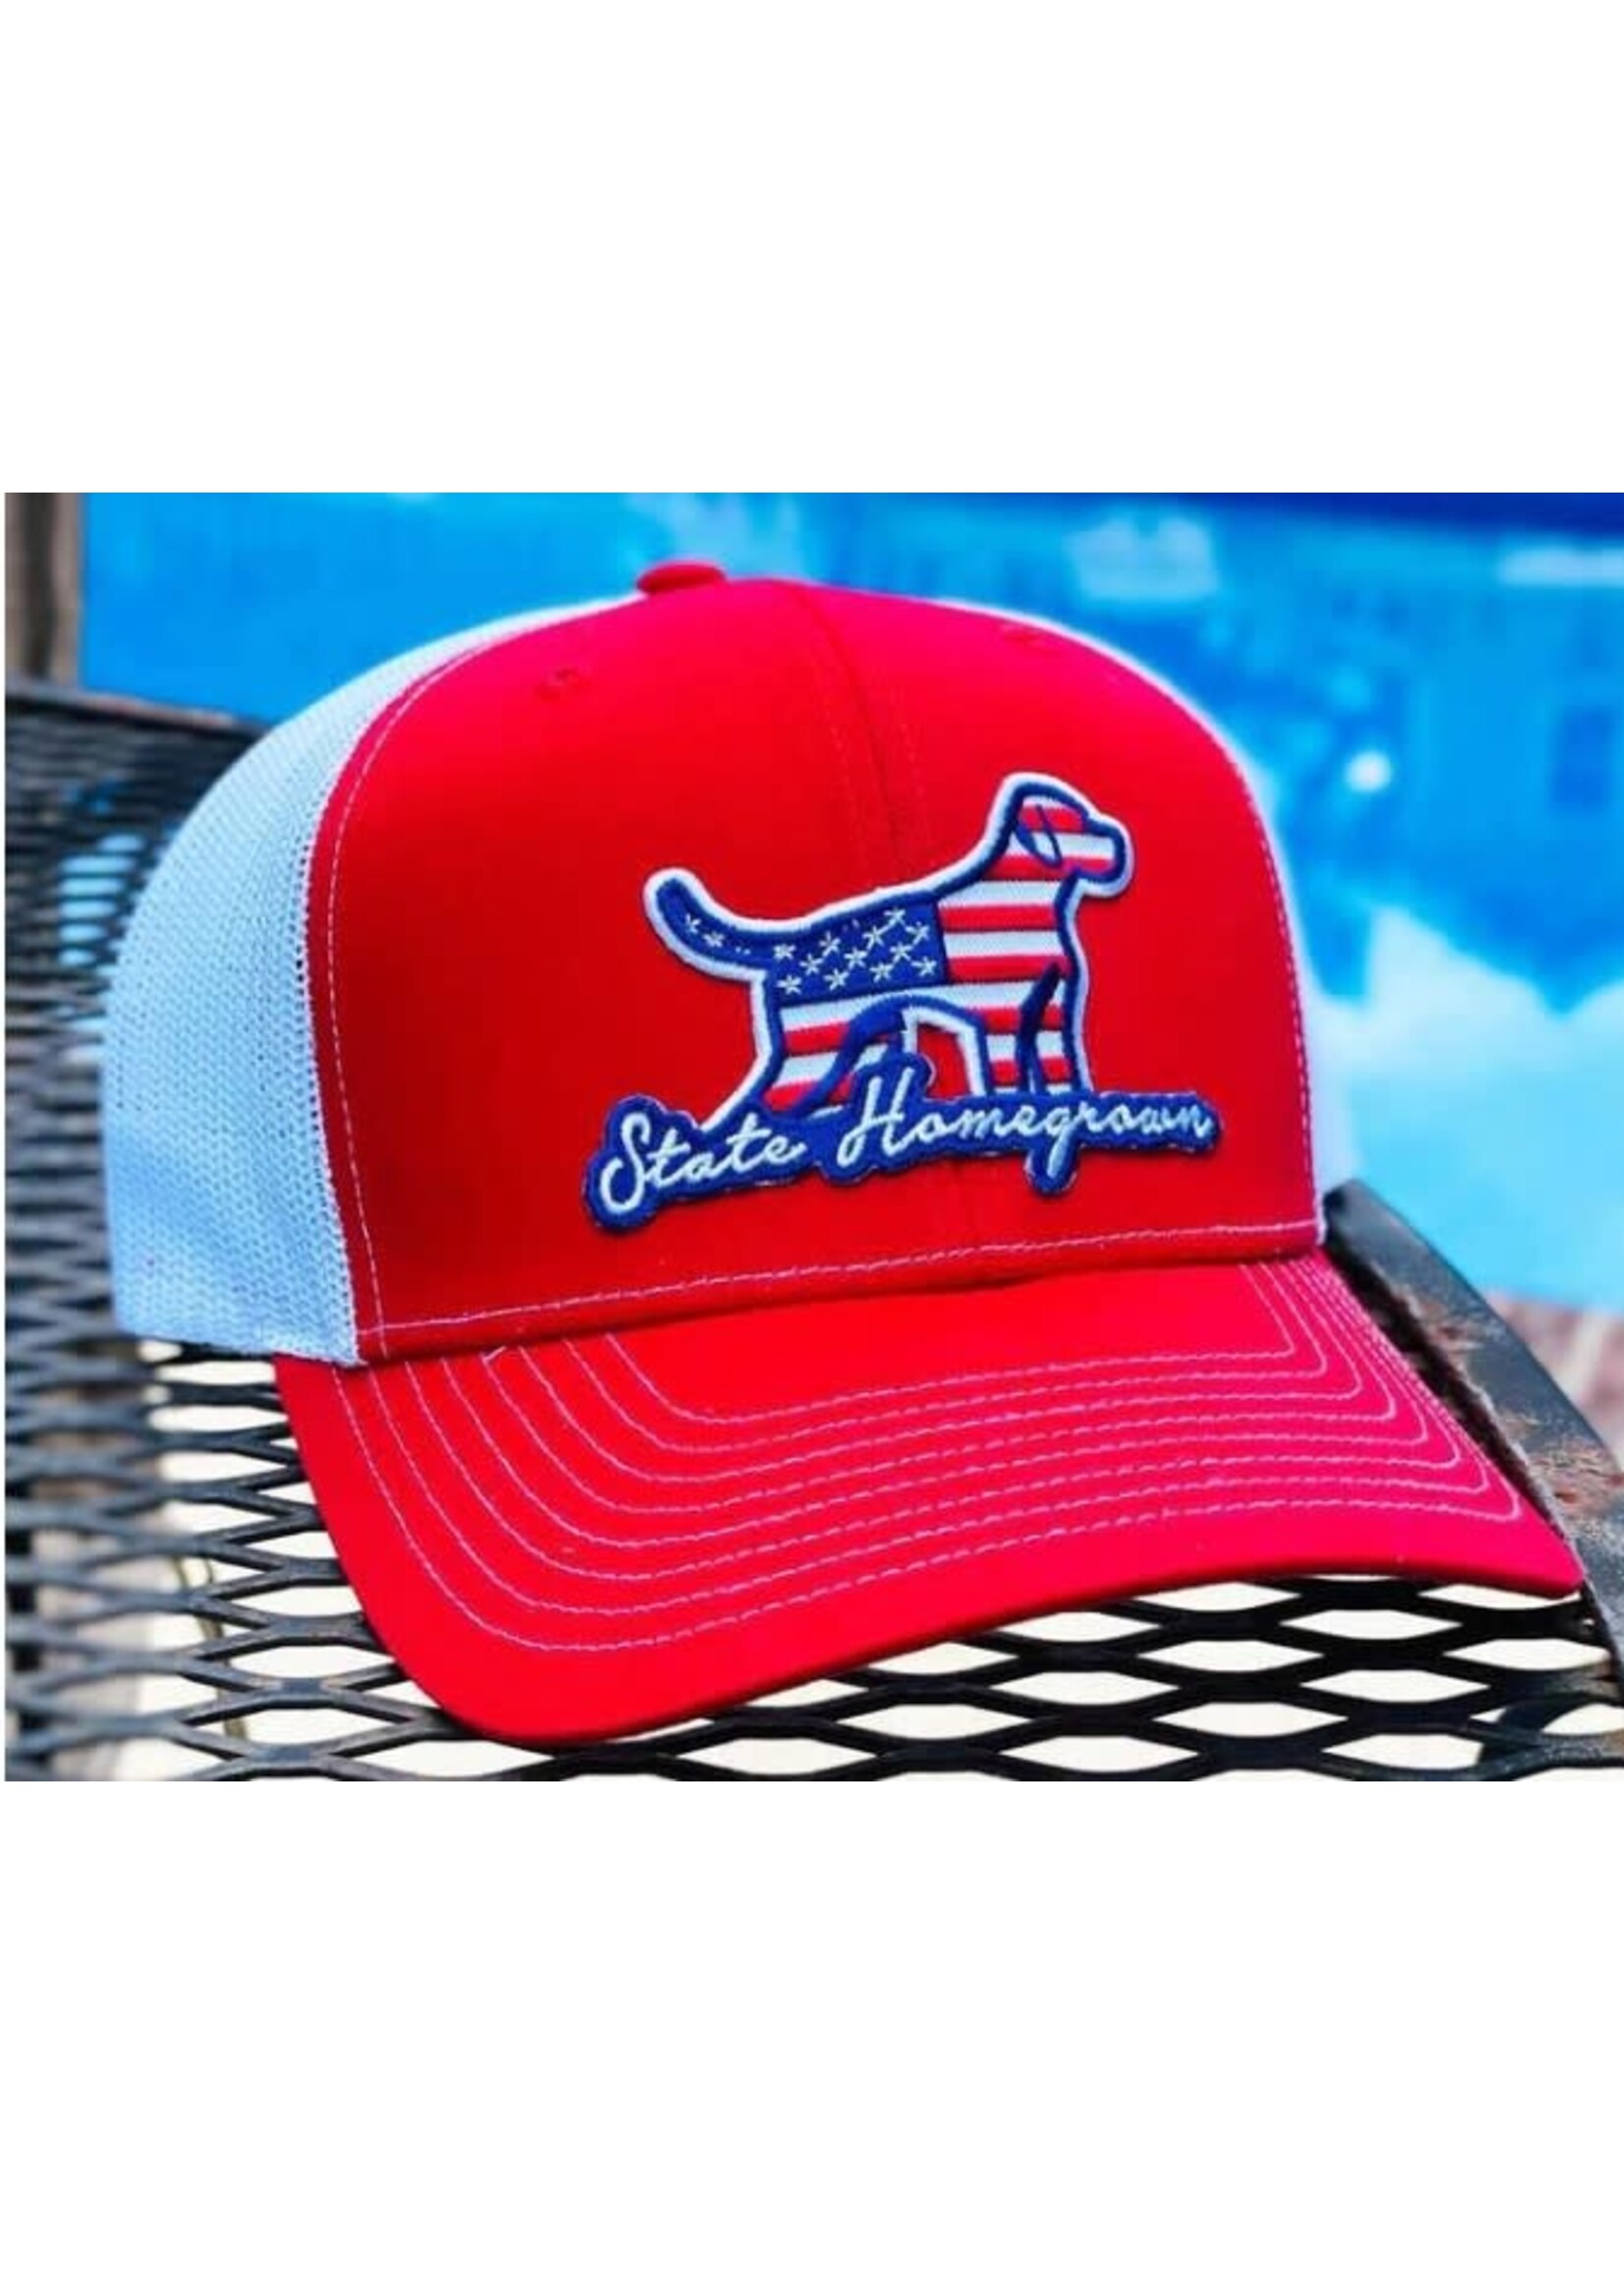 State Homegrown Old Glory Pointer Hat